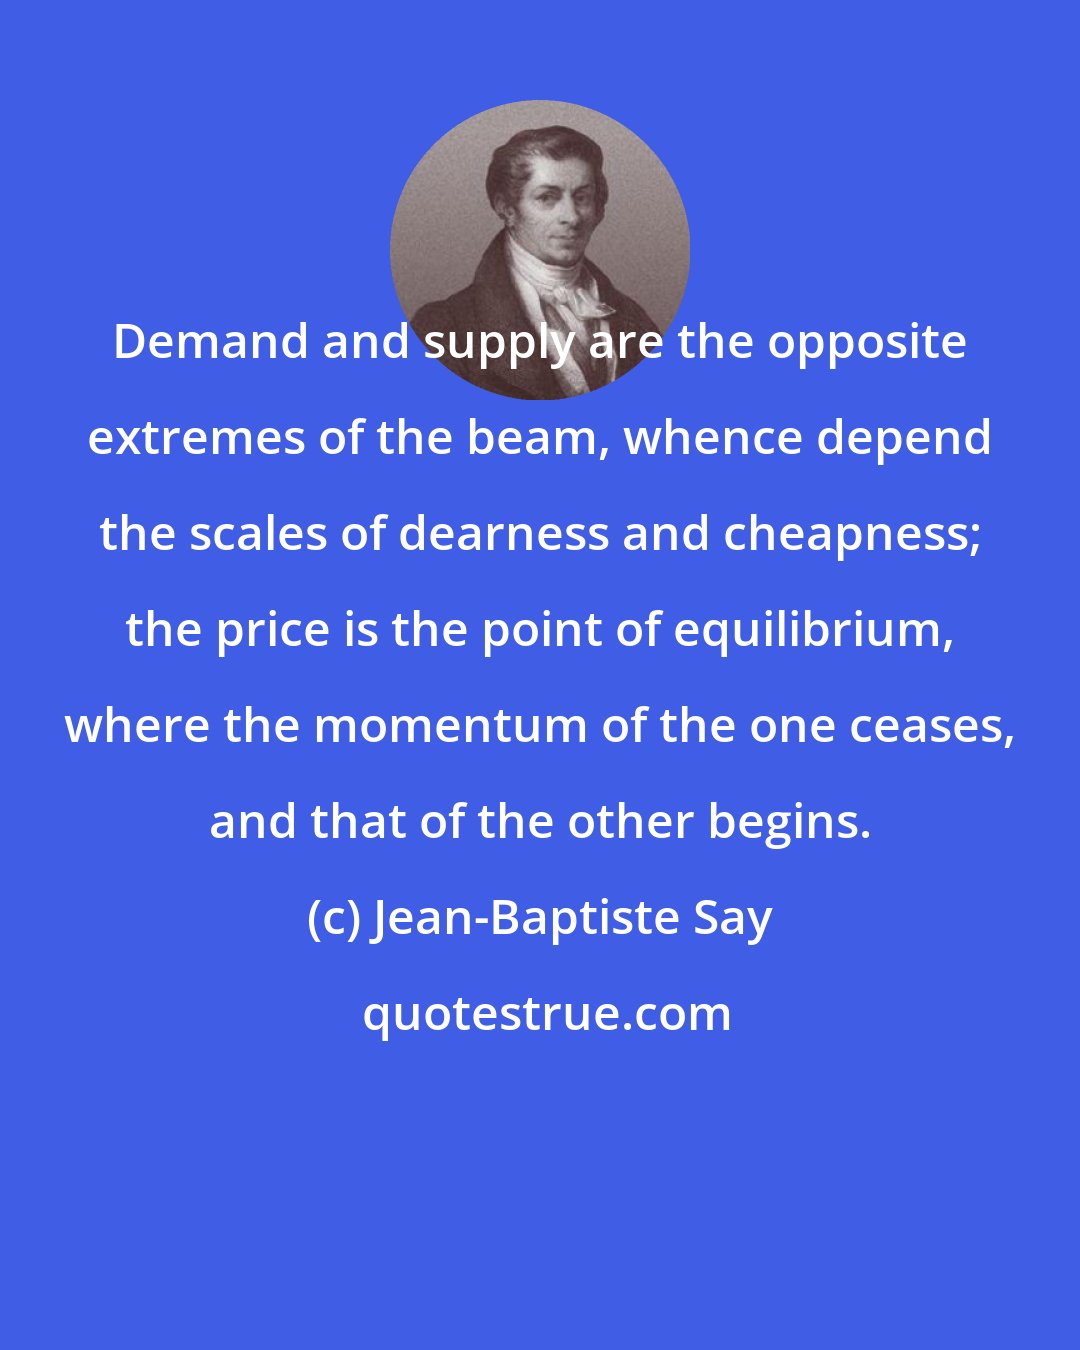 Jean-Baptiste Say: Demand and supply are the opposite extremes of the beam, whence depend the scales of dearness and cheapness; the price is the point of equilibrium, where the momentum of the one ceases, and that of the other begins.